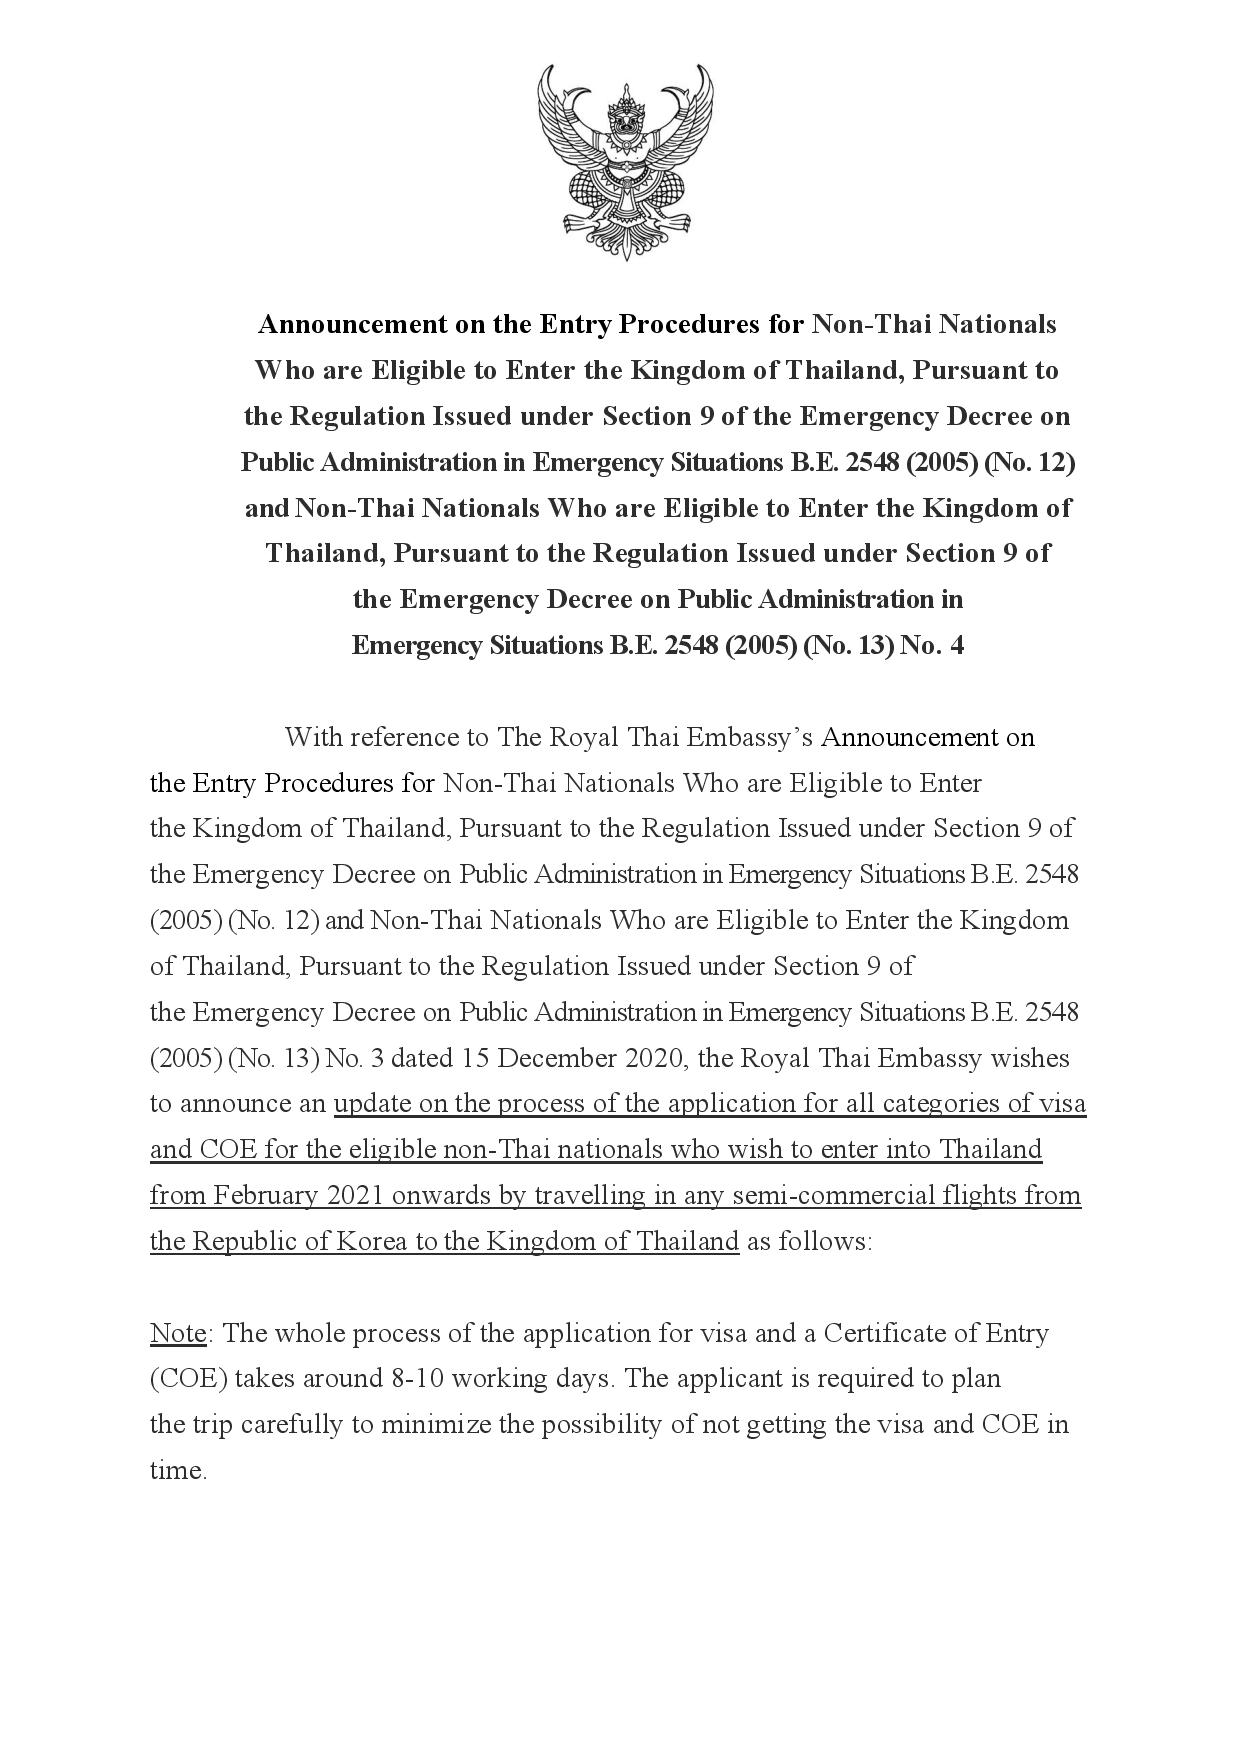 RTE_s_Announcement_on_Updated_Entry_Procedures_for_Non-Thais_No4_(by_Menaka)-page-001